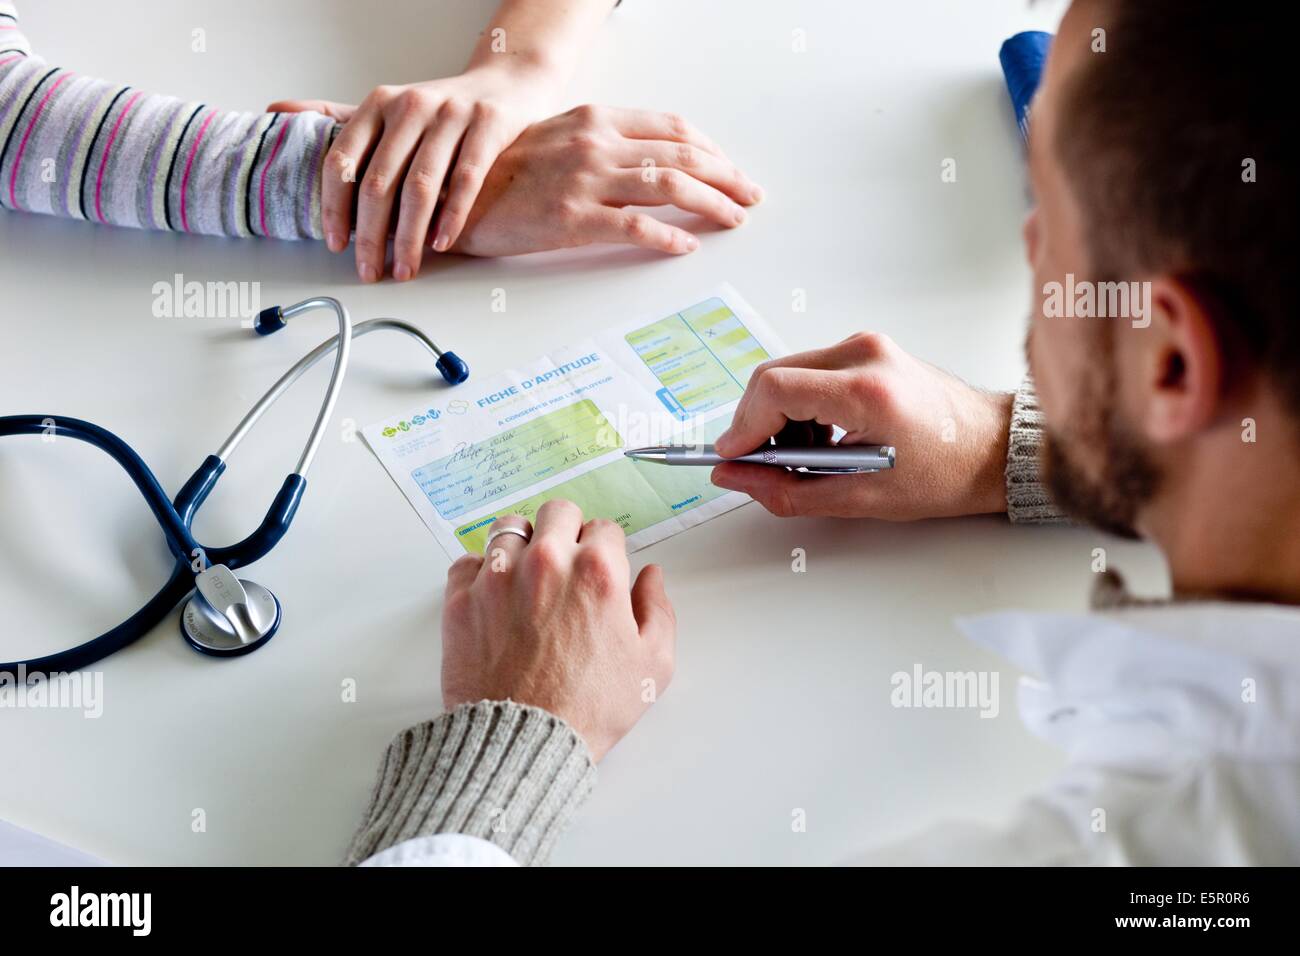 Occupational doctor giving employability document. Stock Photo